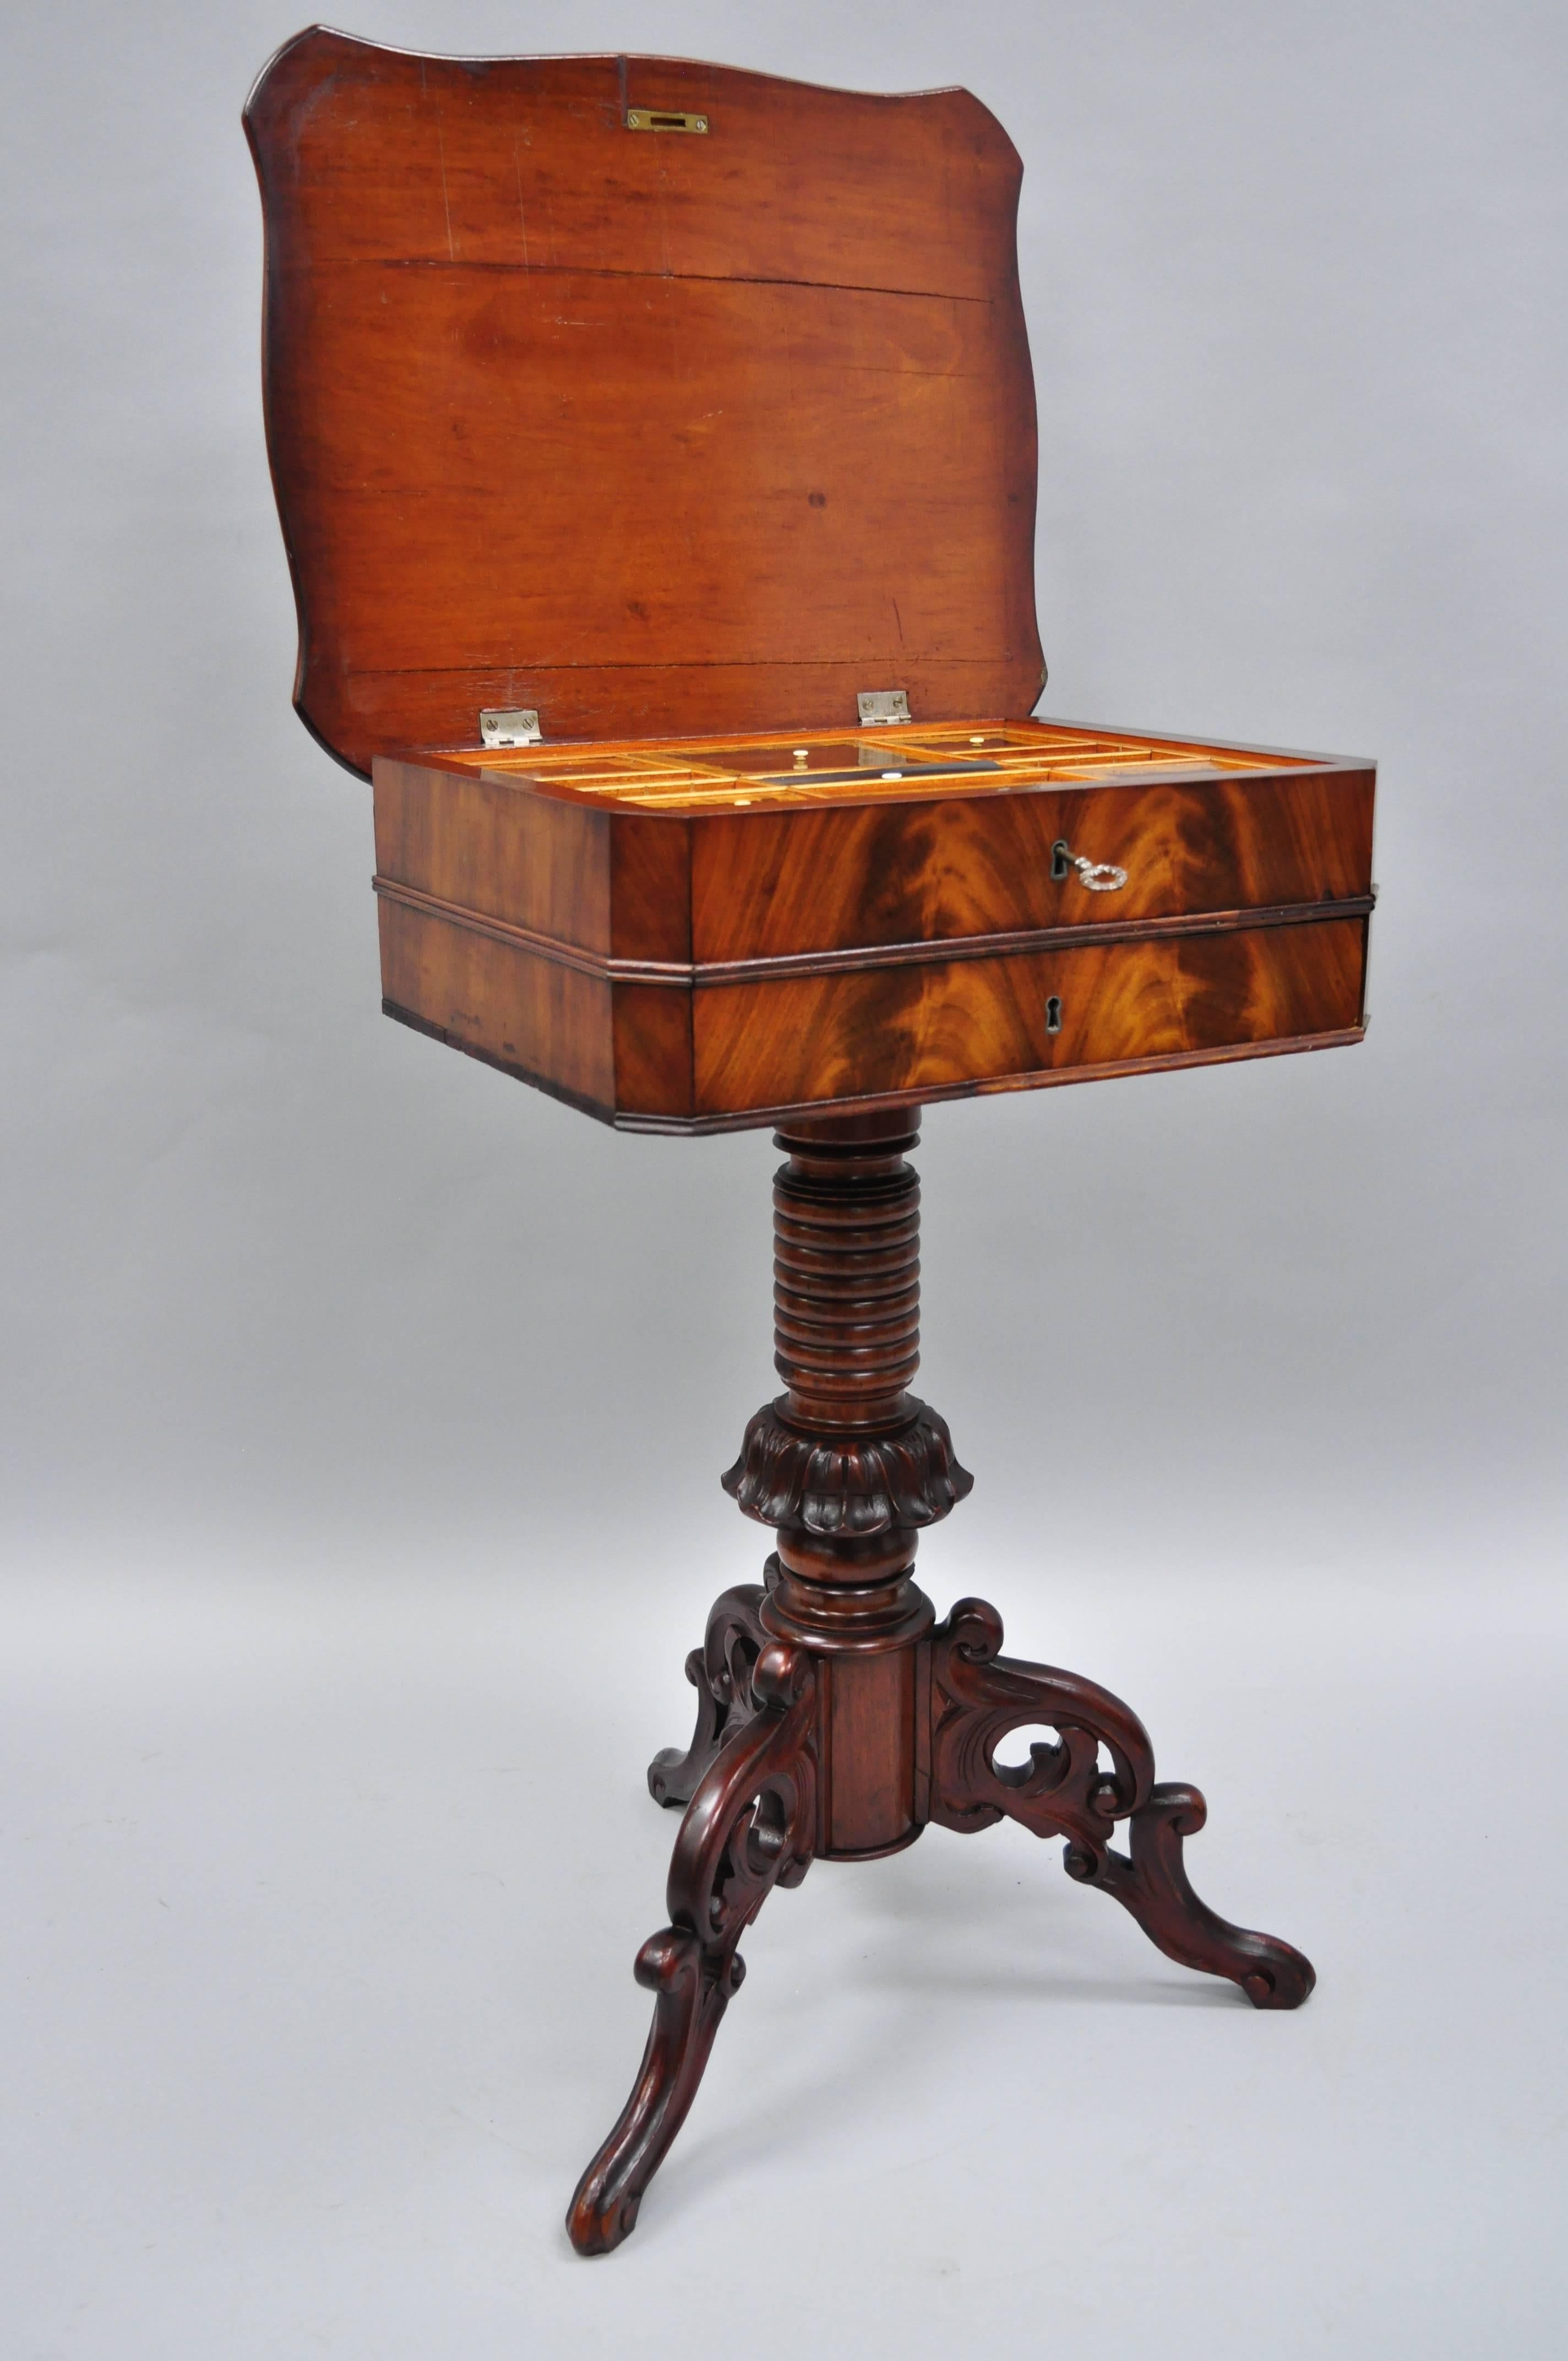 Antique Victorian sewing stand side table in crotch mahogany and walnut. Item features a crotch mahogany banded top, ornately carved tripod pedestal base, beautiful wood grain, finely carved details, working lock and key, two dovetailed drawers.